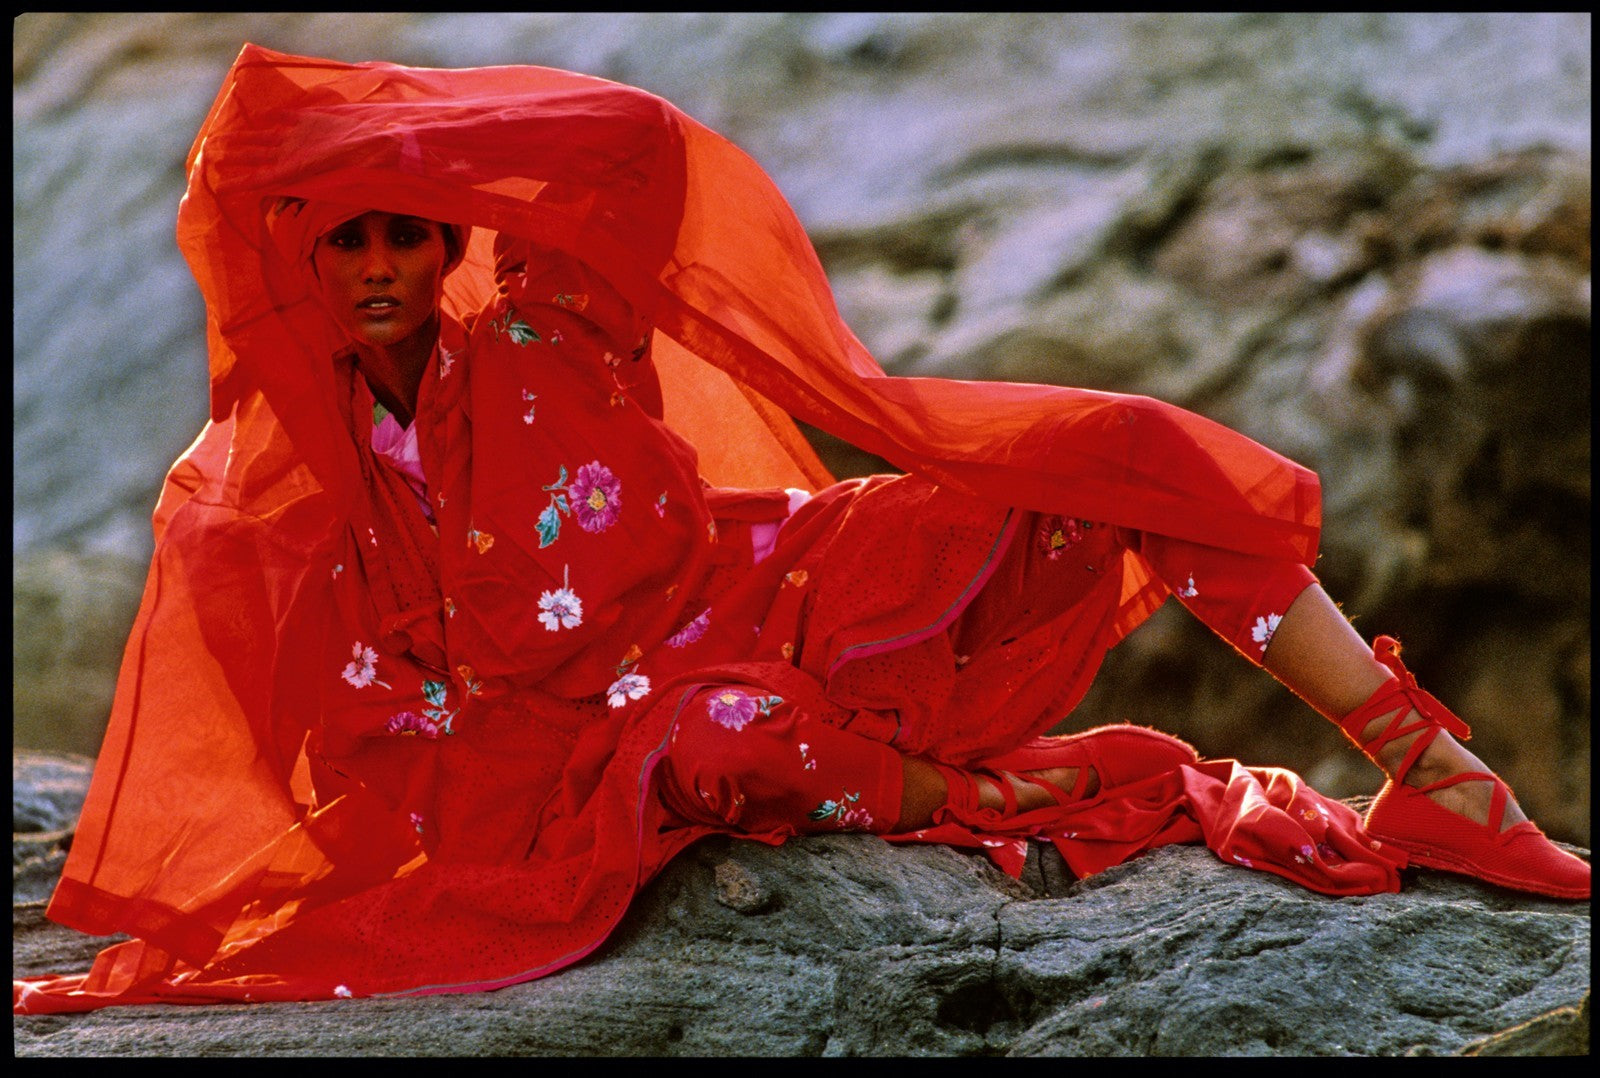 Hans Feurer Kenzo 1983 model in red dress sitting on rocks with veil covering her face